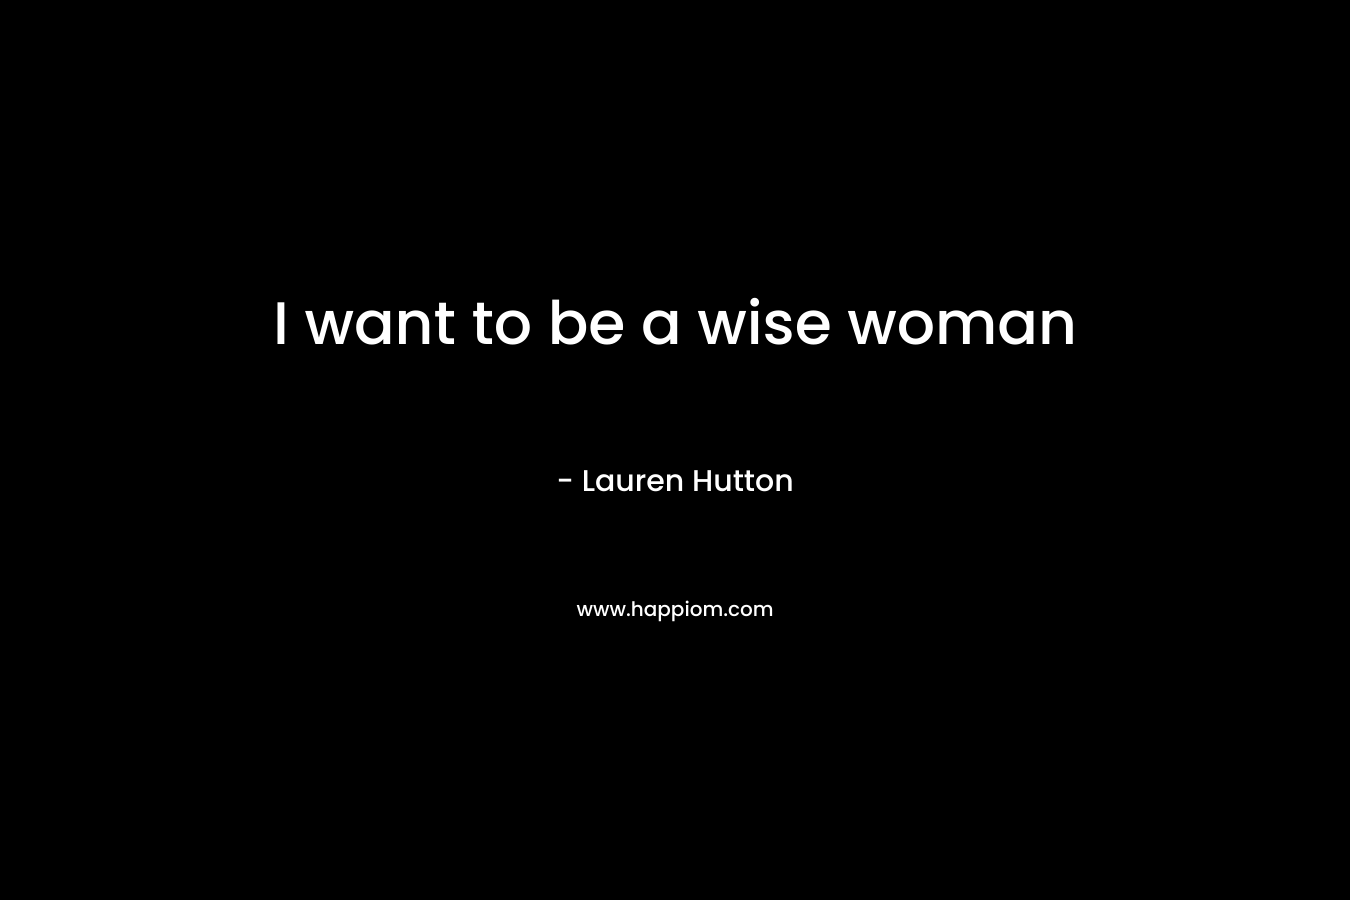 I want to be a wise woman